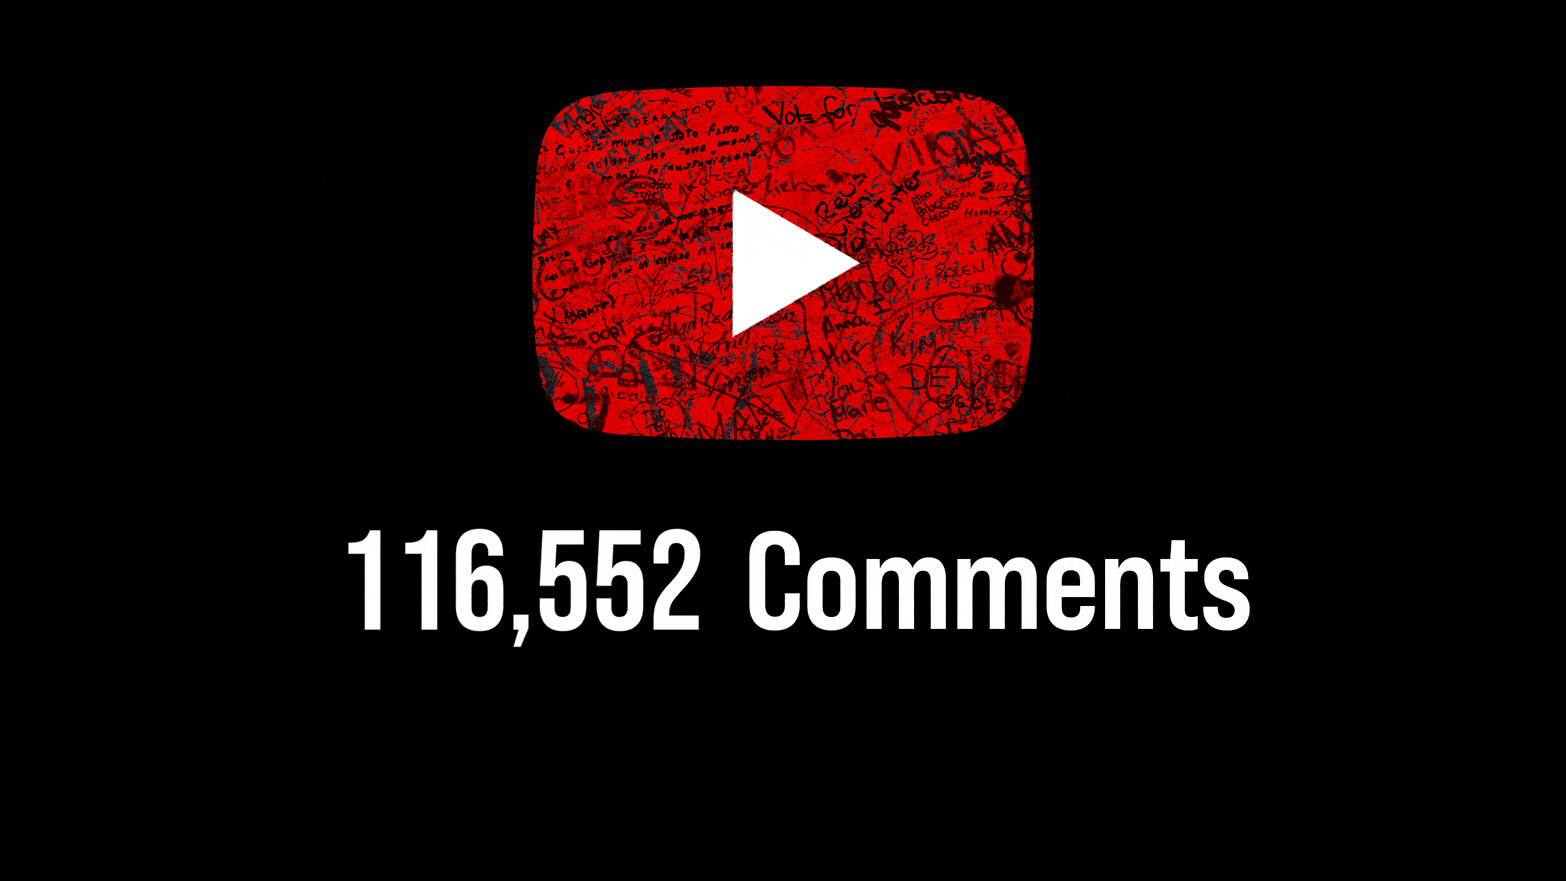 Youtube logo with comments counter